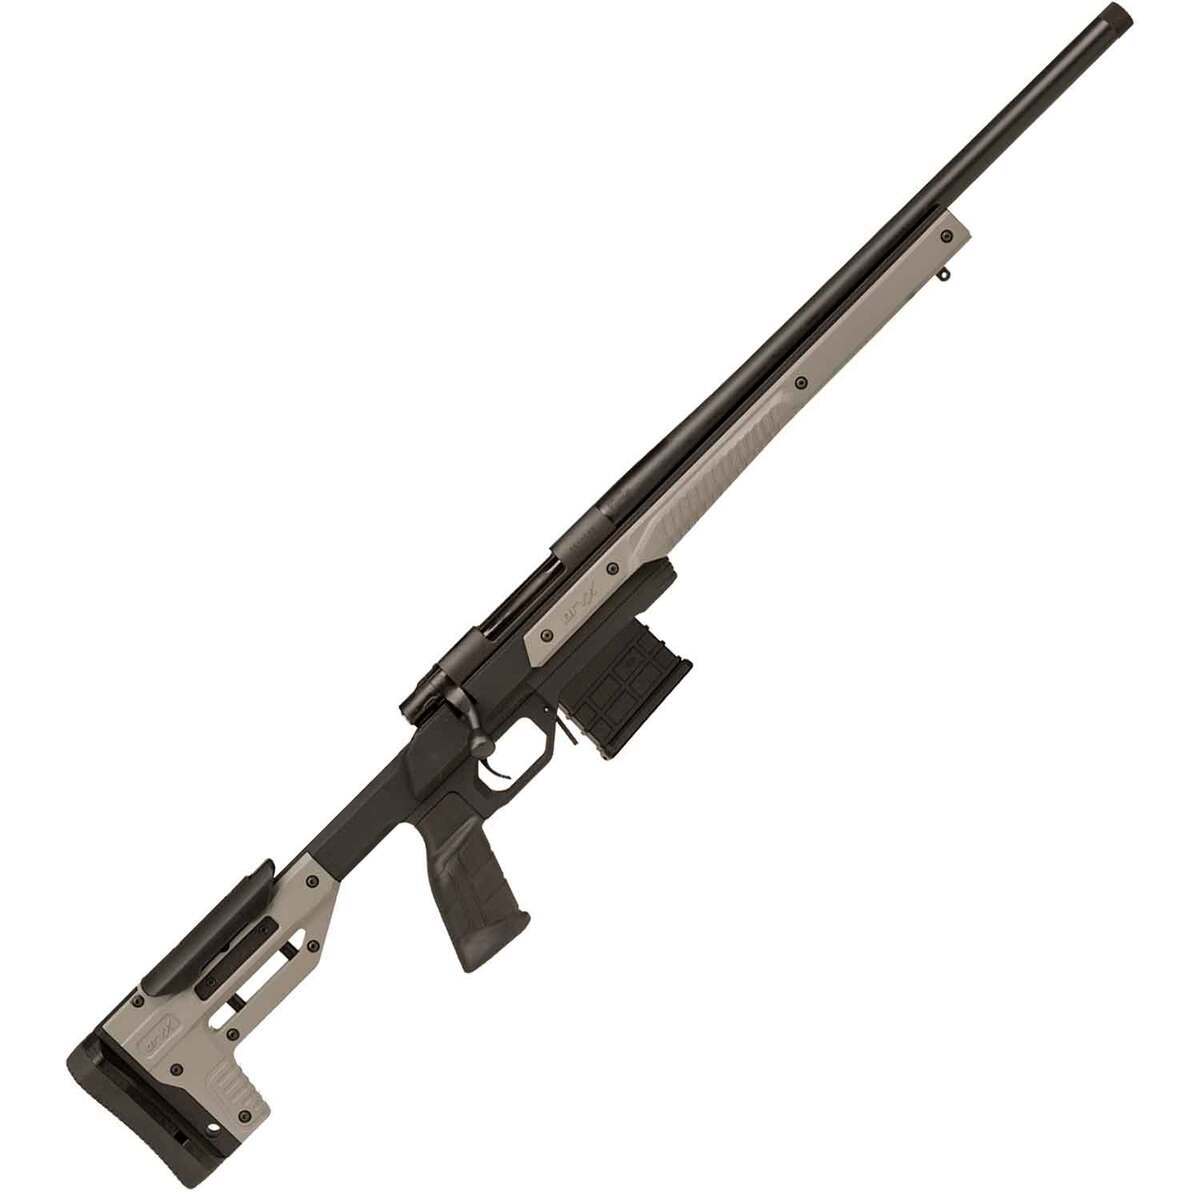 Range Review: Howa Oryx Chassis Rifle An Official Journal, 52% OFF